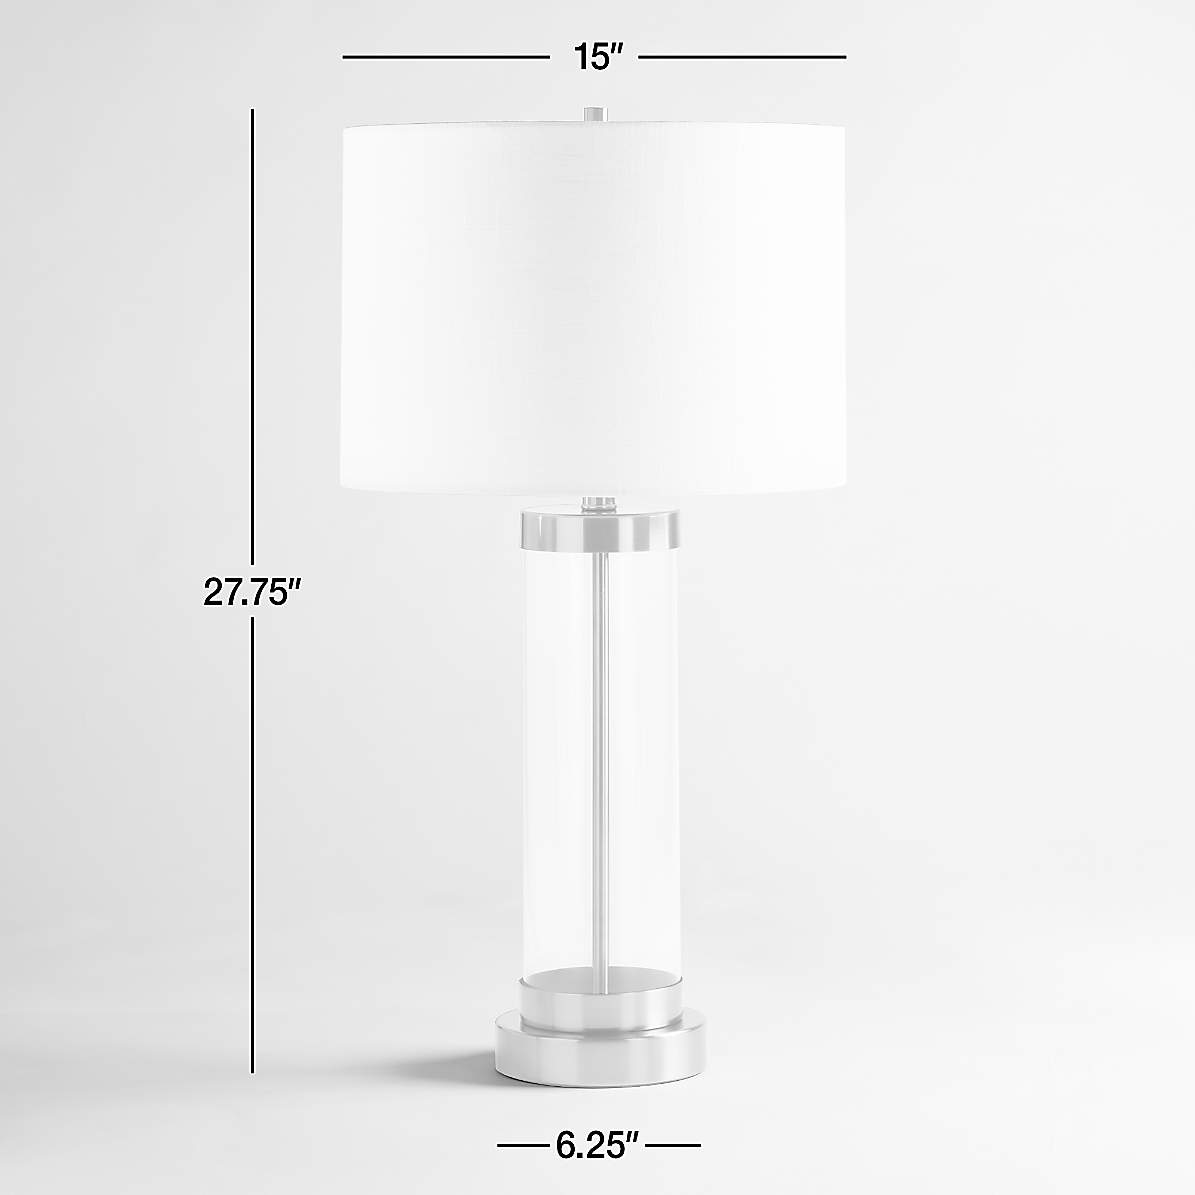 Promenade Small Nickle Table Lamp with USB Port + Reviews